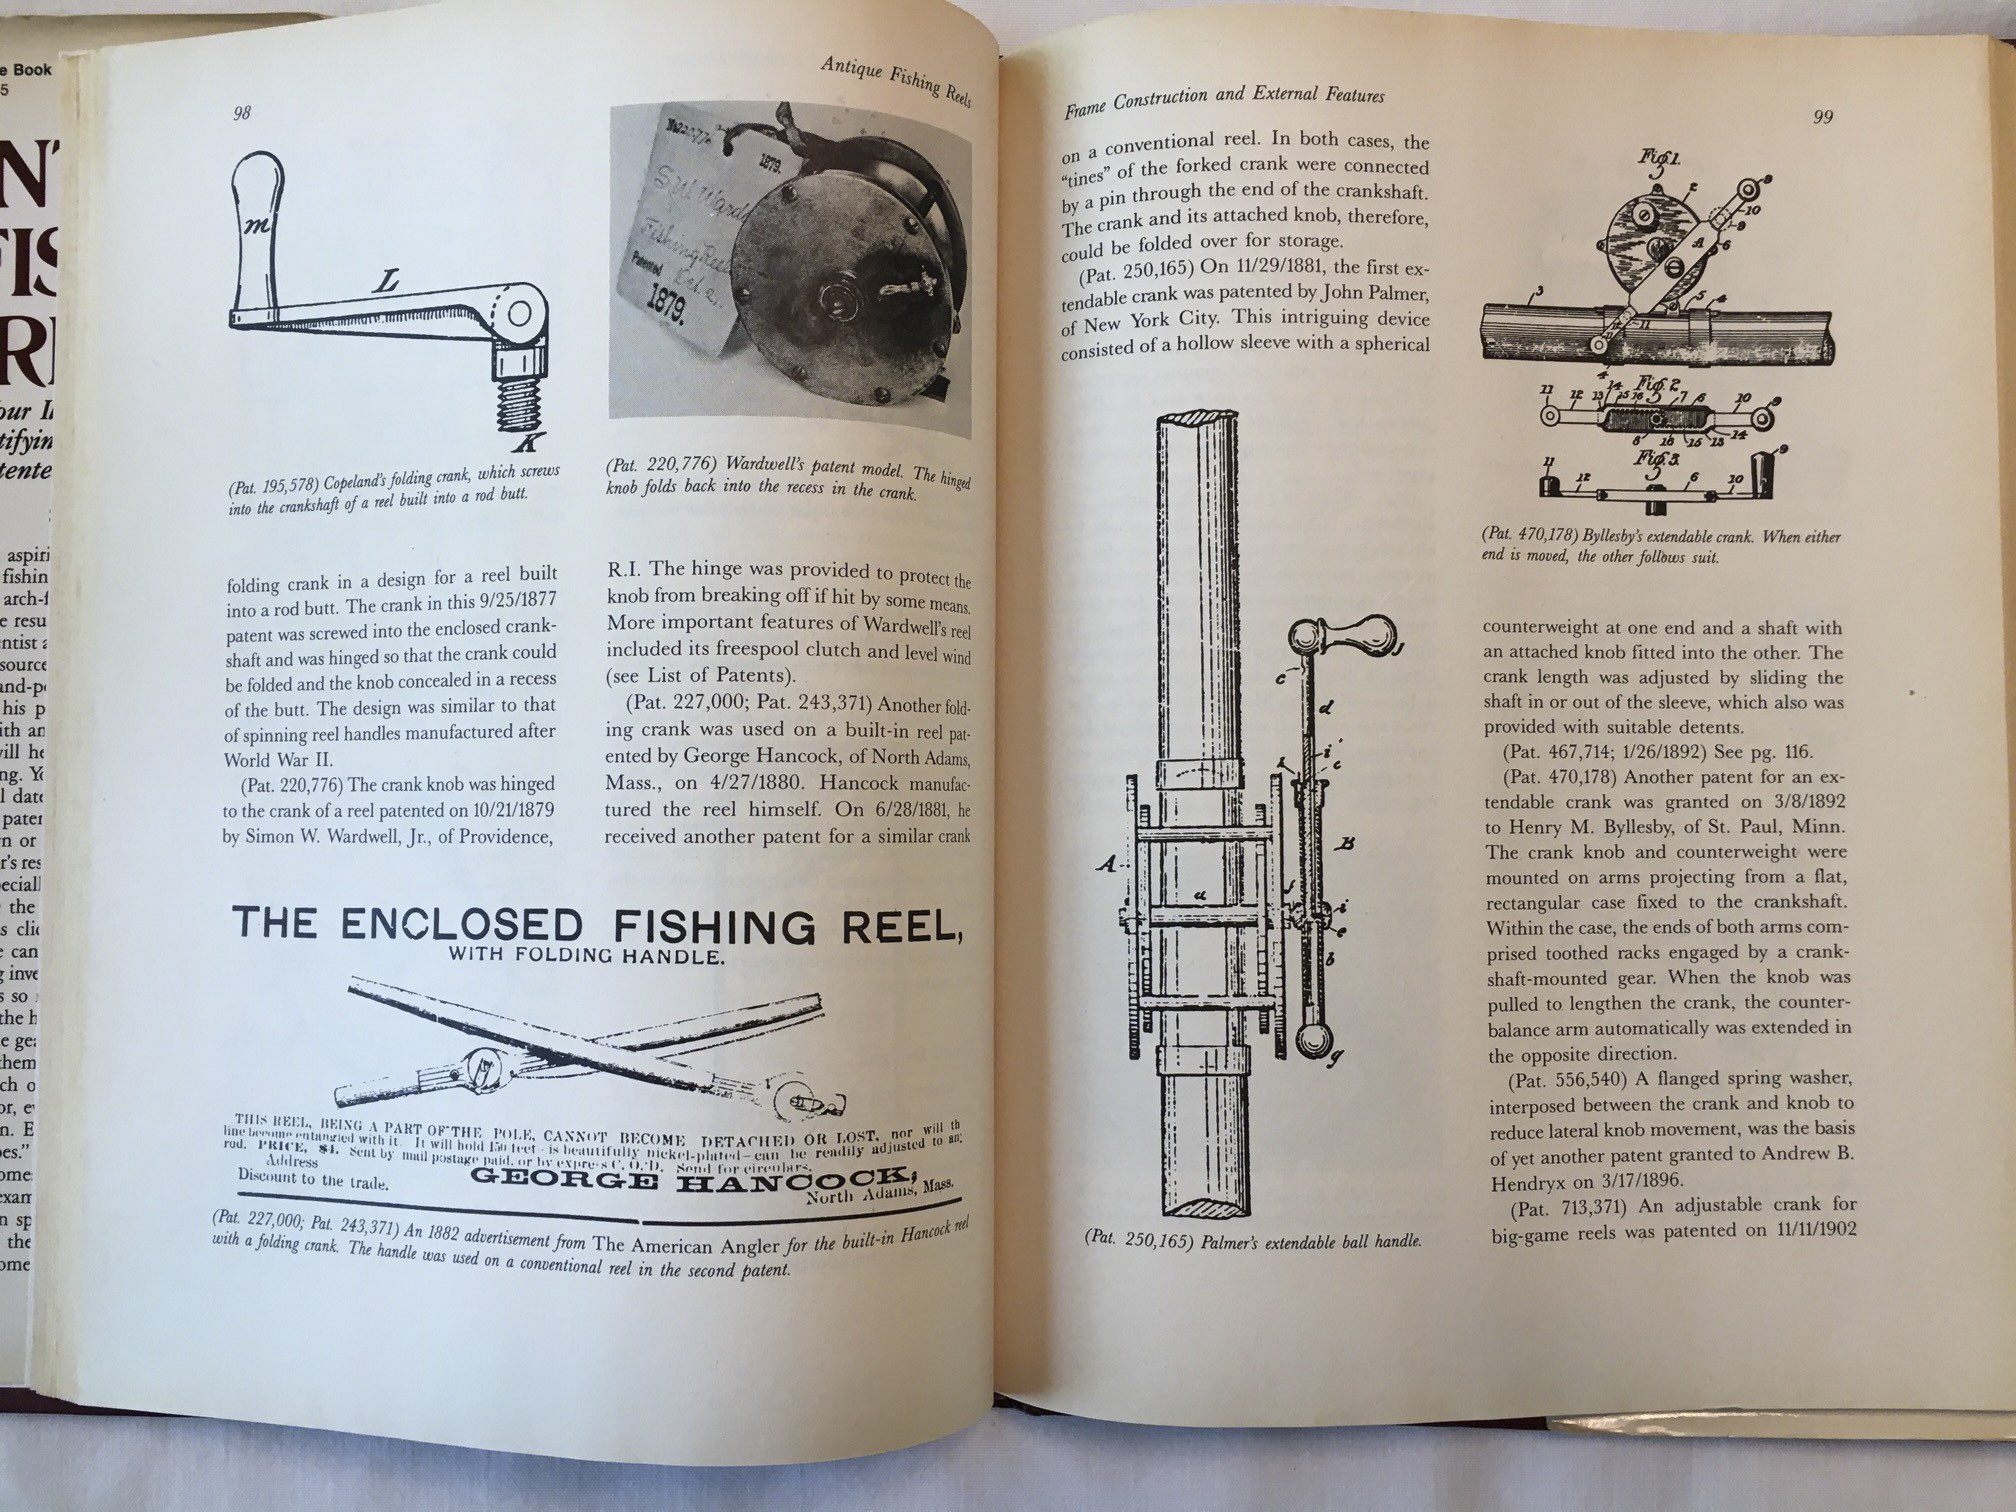 Lawson's Price Guide to Old Fishing Reels Book 